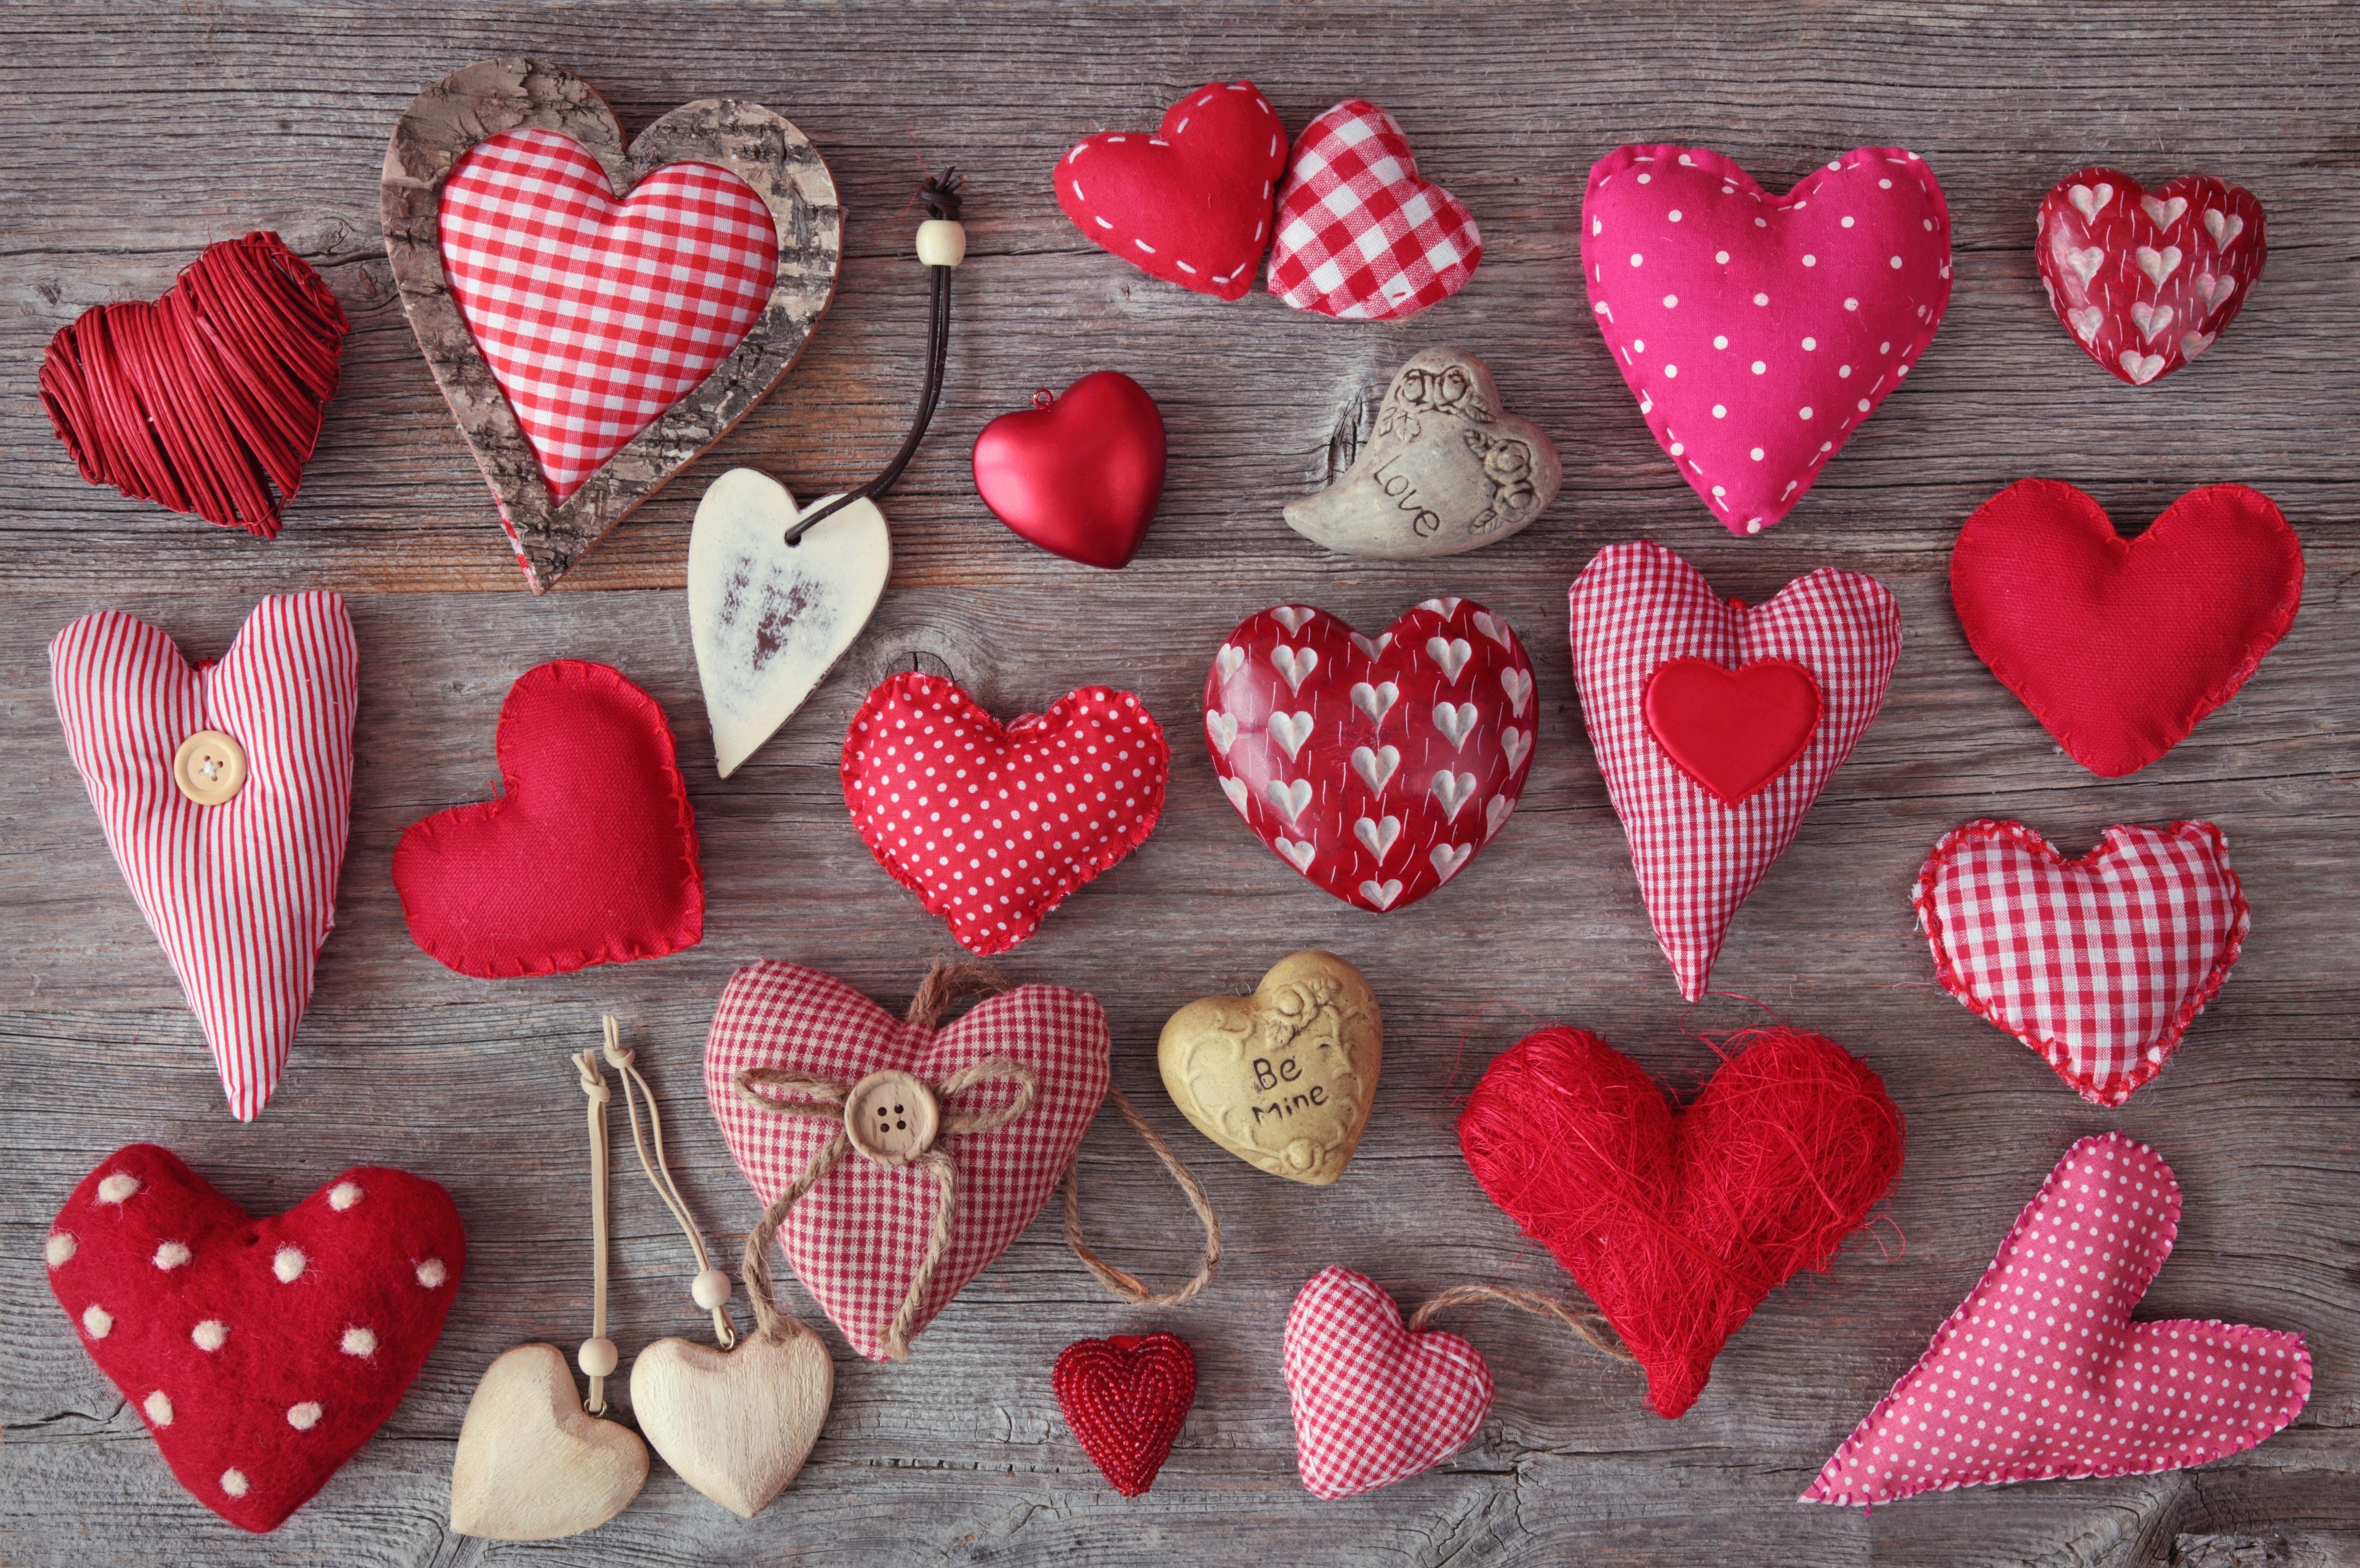 hearts, love, pink, red, wood, tree, cloth, pads, lettering, inscriptions